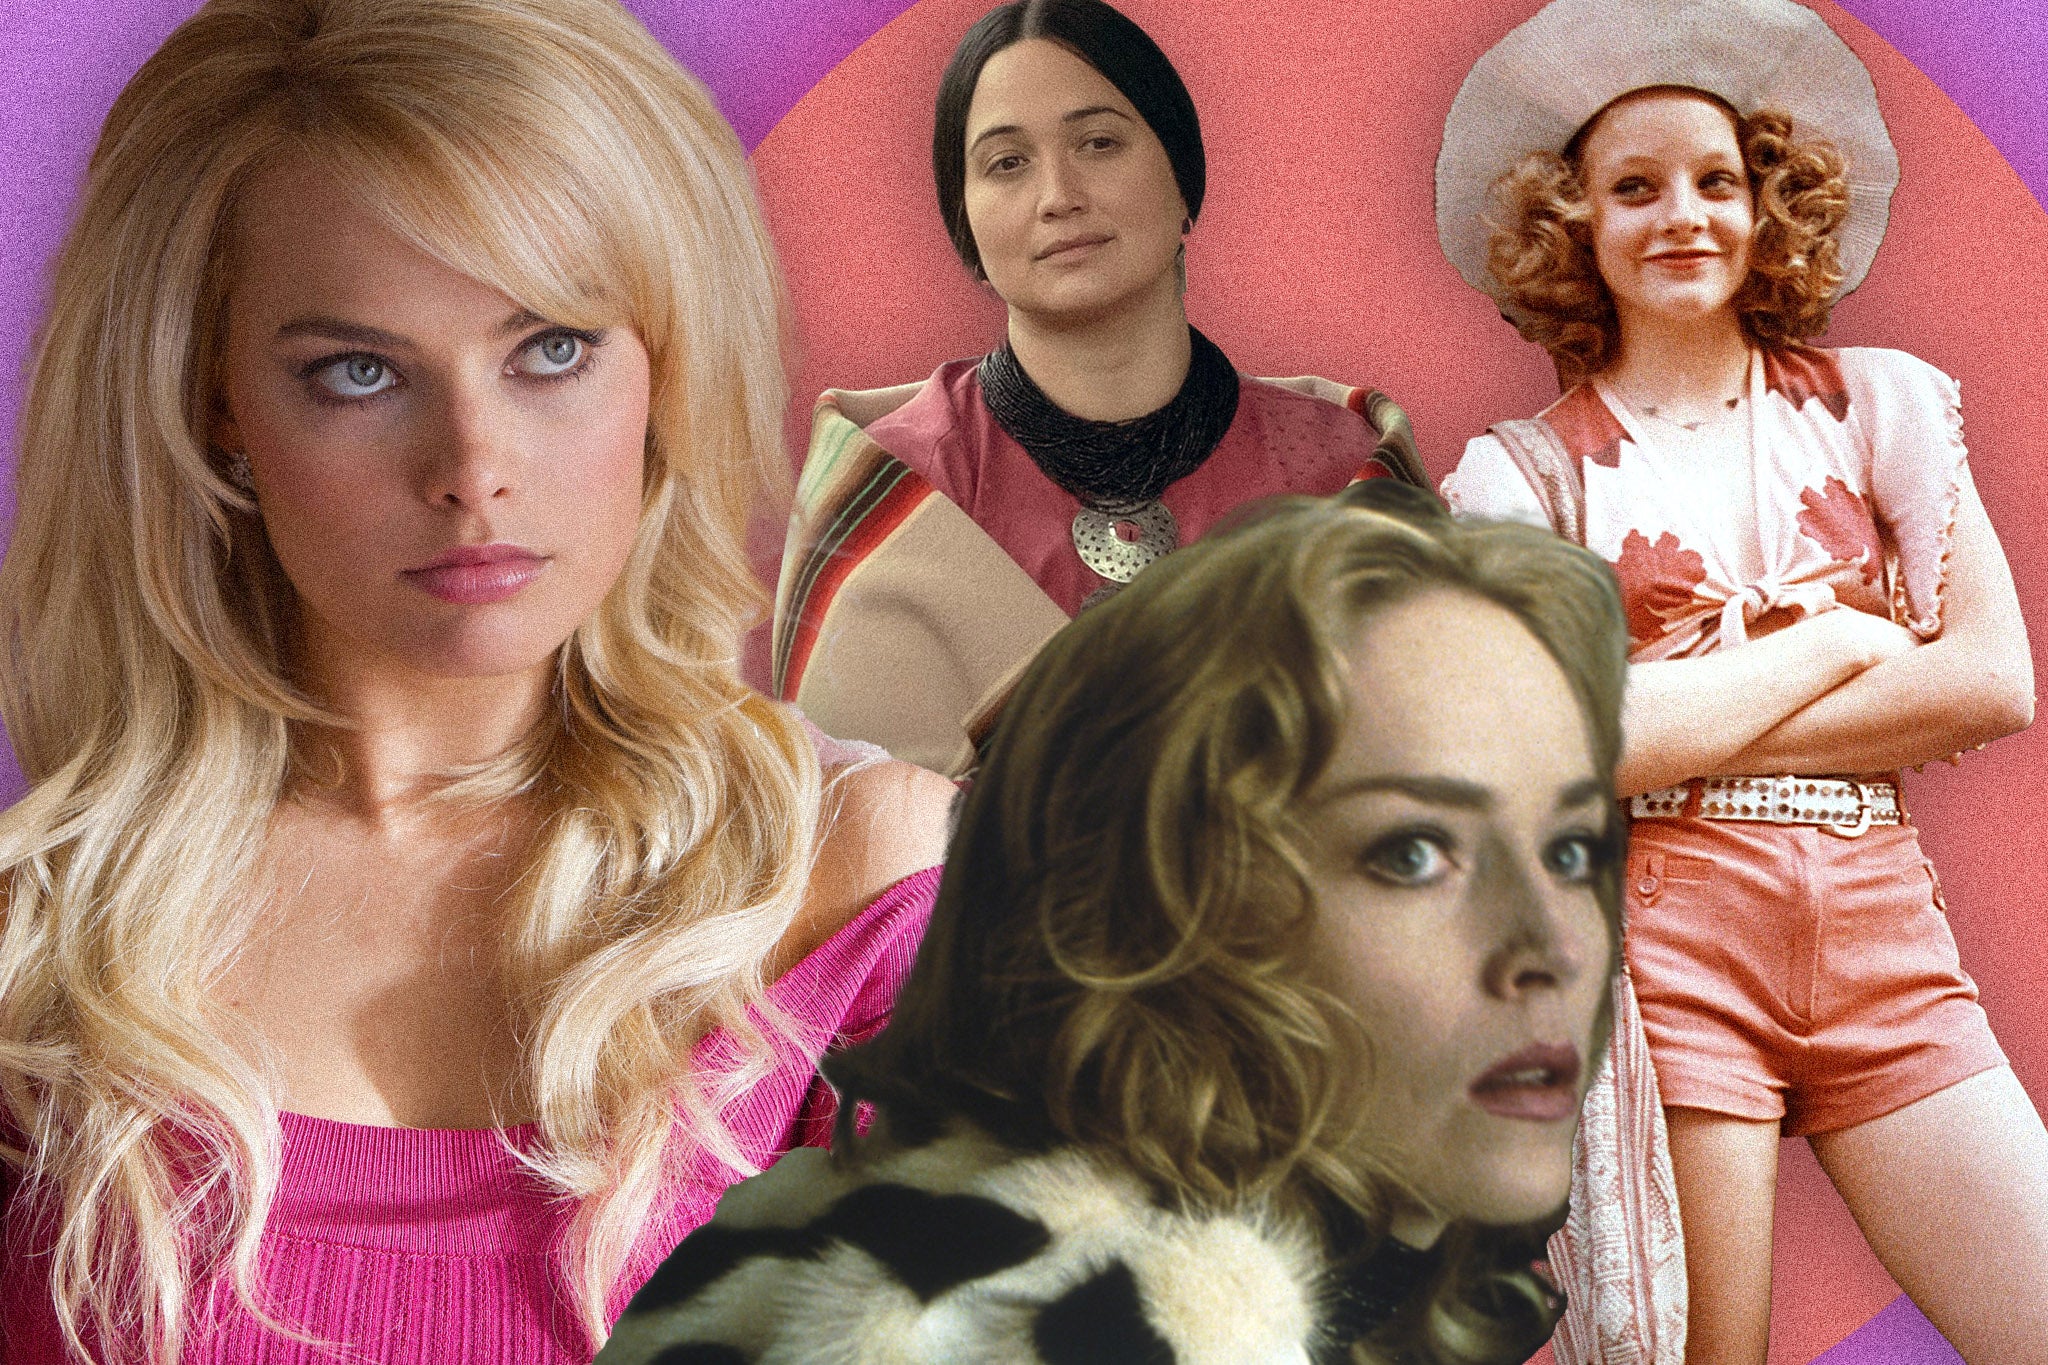 Role call: Margot Robbie in ‘The Wolf of Wall Street’, Lily Gladstone in ‘Killers of the Flower Moon’, Sharon Stone in ‘Casino’ and Jodie Foster in ‘Taxi Driver’